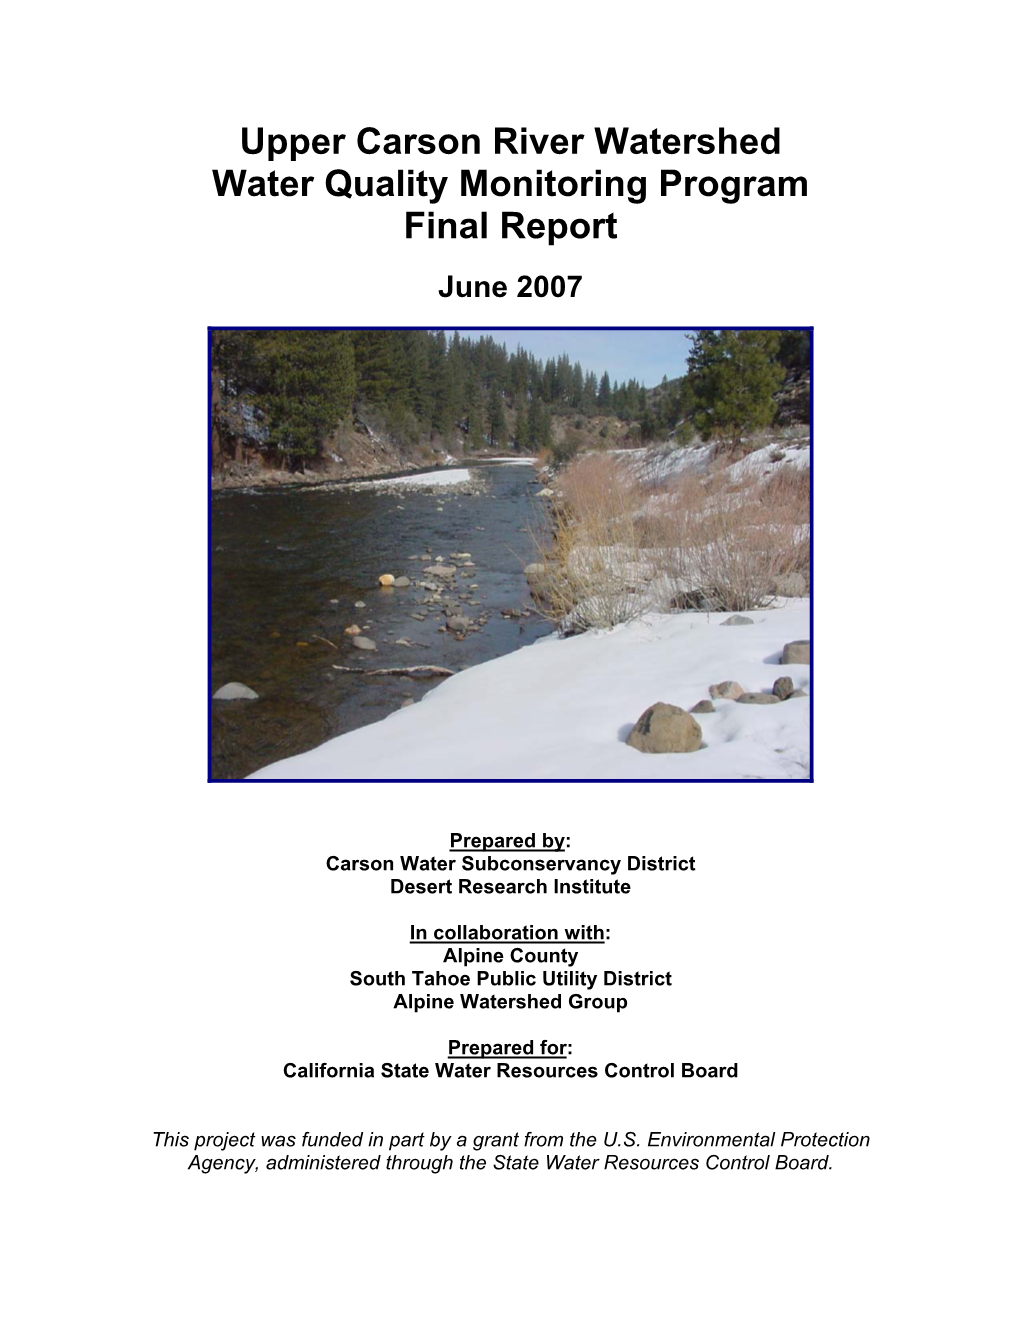 Upper Carson River Water Quality Monitoring Program Table of Contents